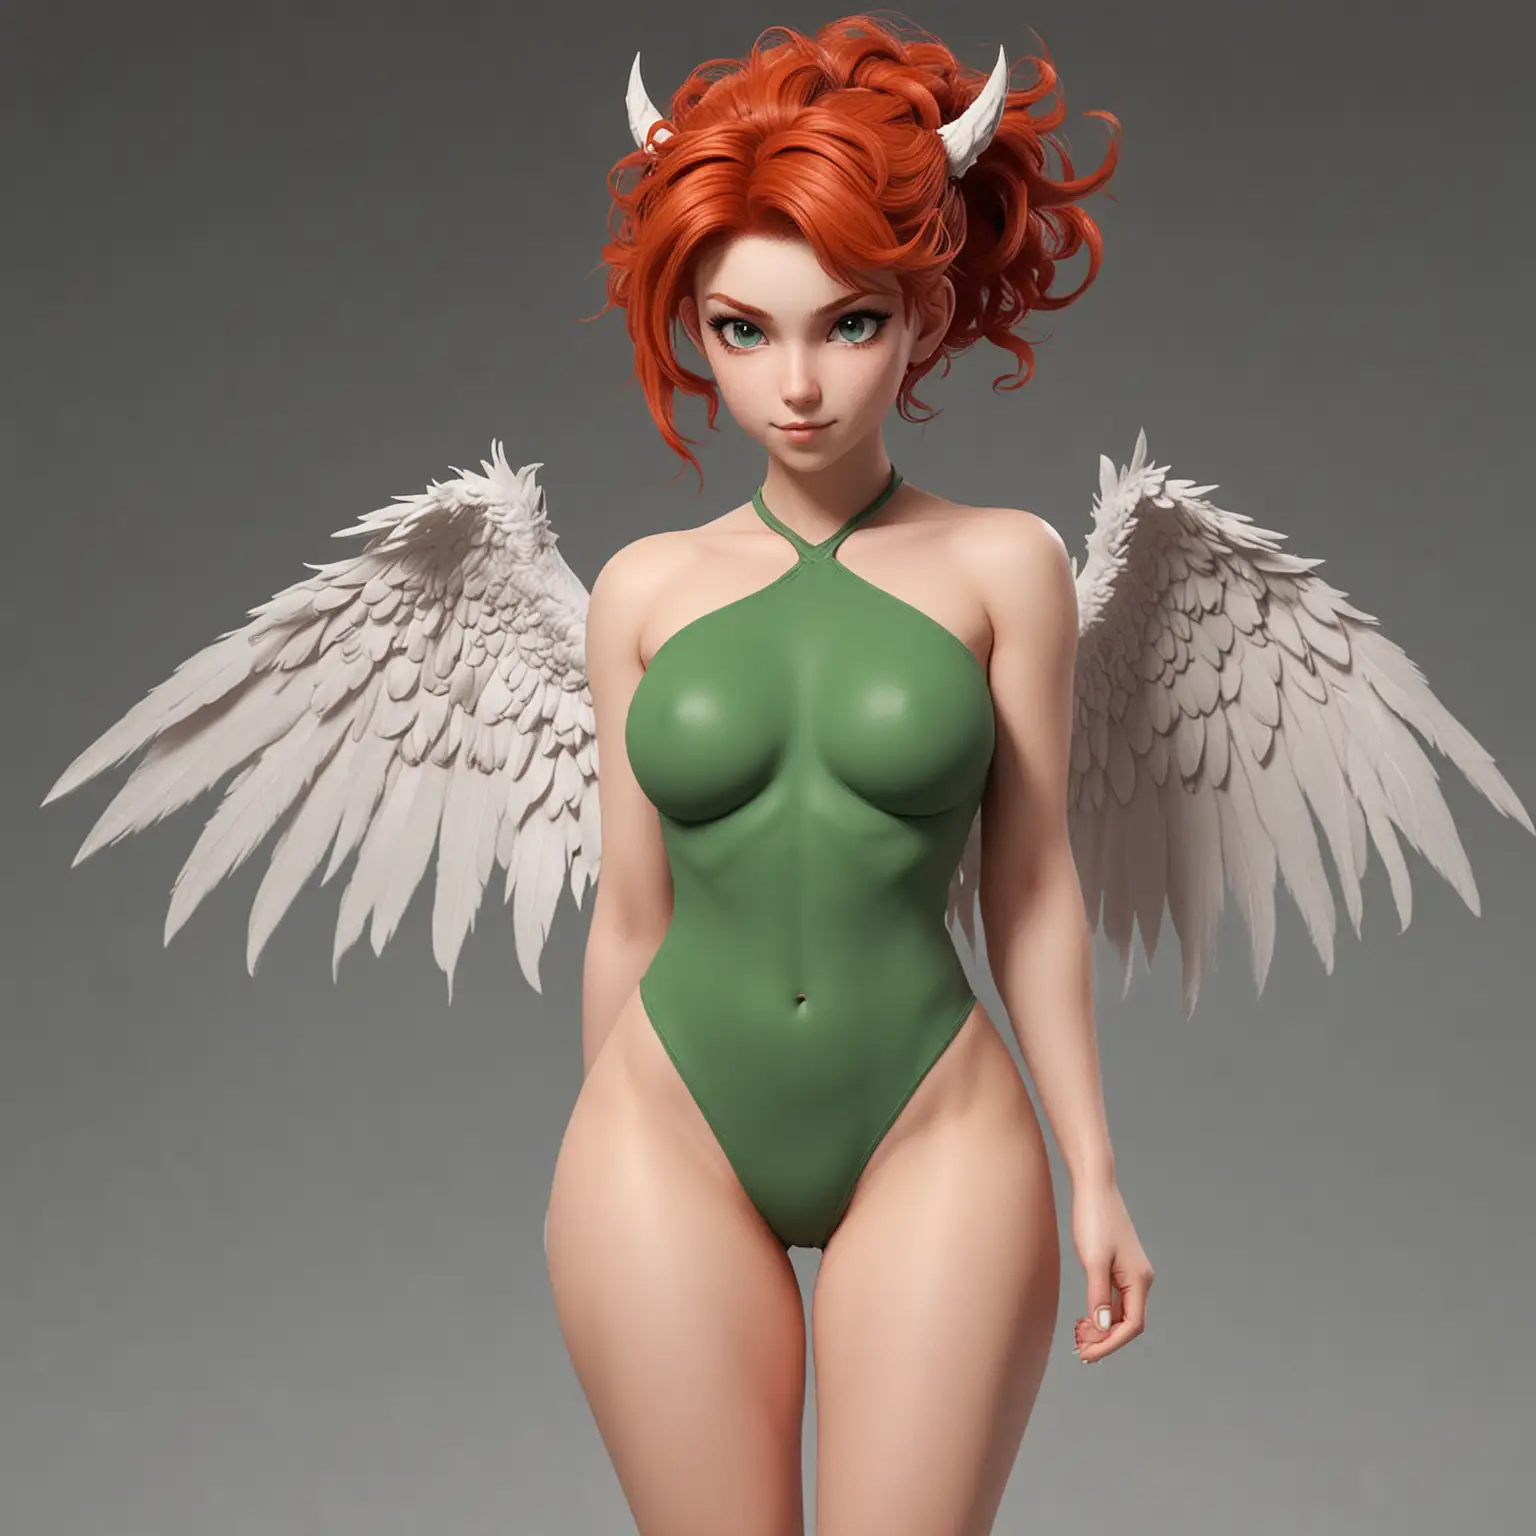 18yo girl. Eye Color(s): green (human form), purple (demon), white (angel form) - Hair Color: dark auburn (human), bright red (demon), soft strawberry blonde (angel) - Hair Style(s): curly chest length for female in human form, short ear-length for male in human form, buns or half ponies for both. Long straight for female in demon form, spiky and shaved on one side for male in demon form. Tight bun for female in angel form, styled and short for male in angel form. - Body type: lithe for both, curvy for female, muscular for both, skinny for both - Height: 5’02 - Weight: 136 lbs